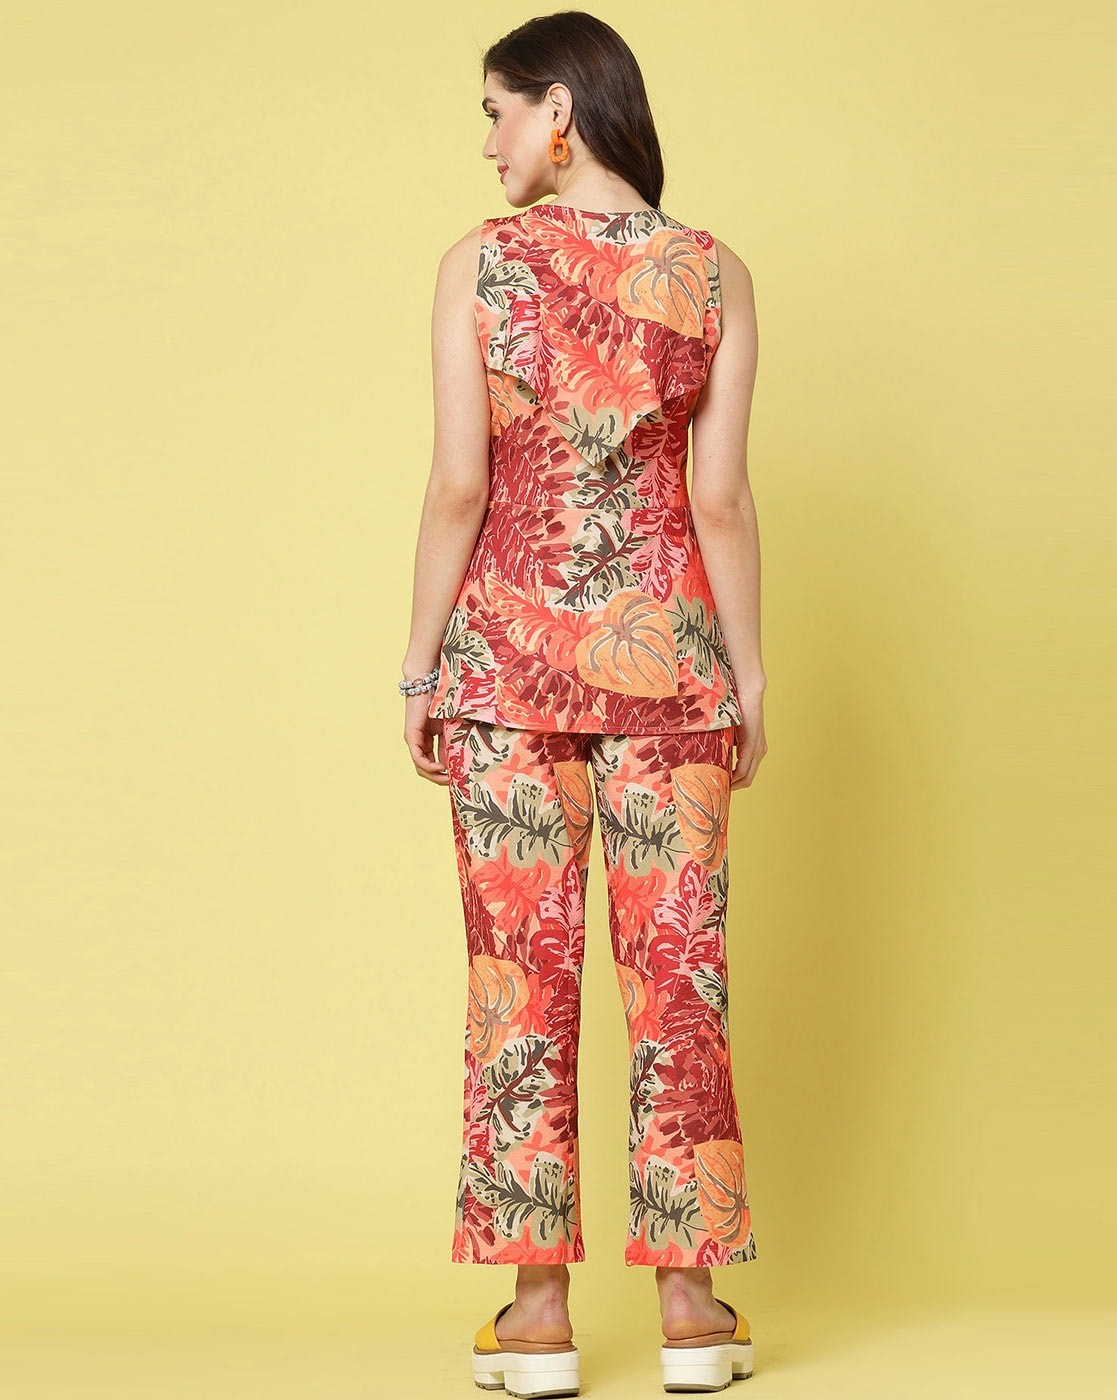 Women Co-ord Set Printed Sleeveless Top and Full Length Trouser Pant